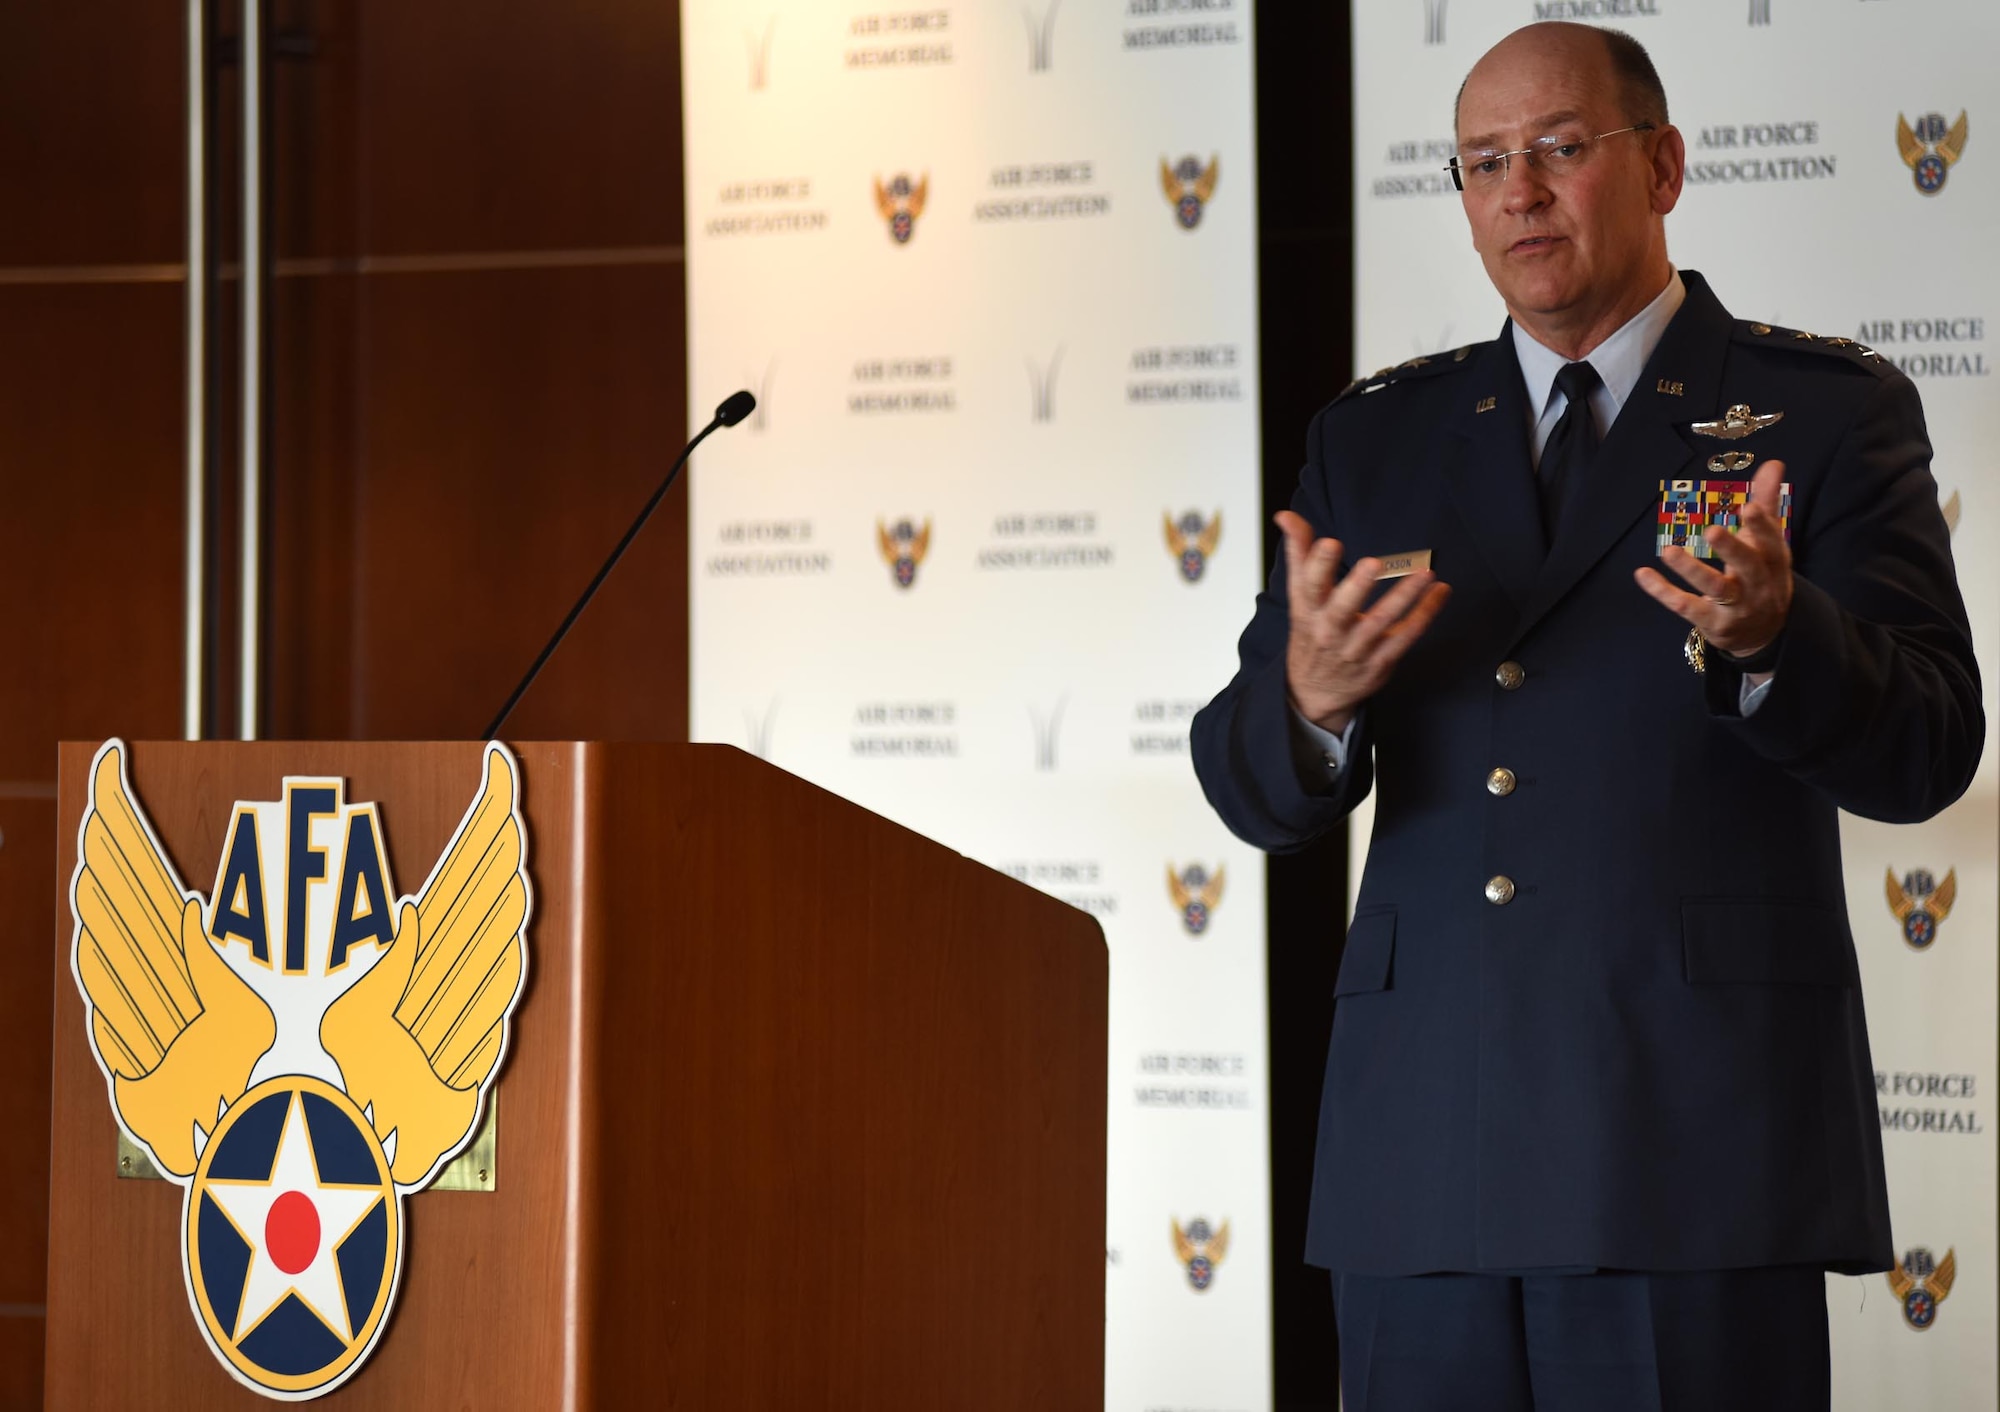 Lt. Gen. James F. Jackson, the commander of the Air Force Reserve Command, speaks to more than 70 guests of the Air Force Association’s monthly breakfast July 7, 2015, in Arlington, Virginia. AFA’s breakfast program is a monthly series that provides a venue for senior Air Force and Department of Defense leaders to communicate directly with the public and the press. (U.S. Air Force photo/Tech. Sgt. Dan DeCook)